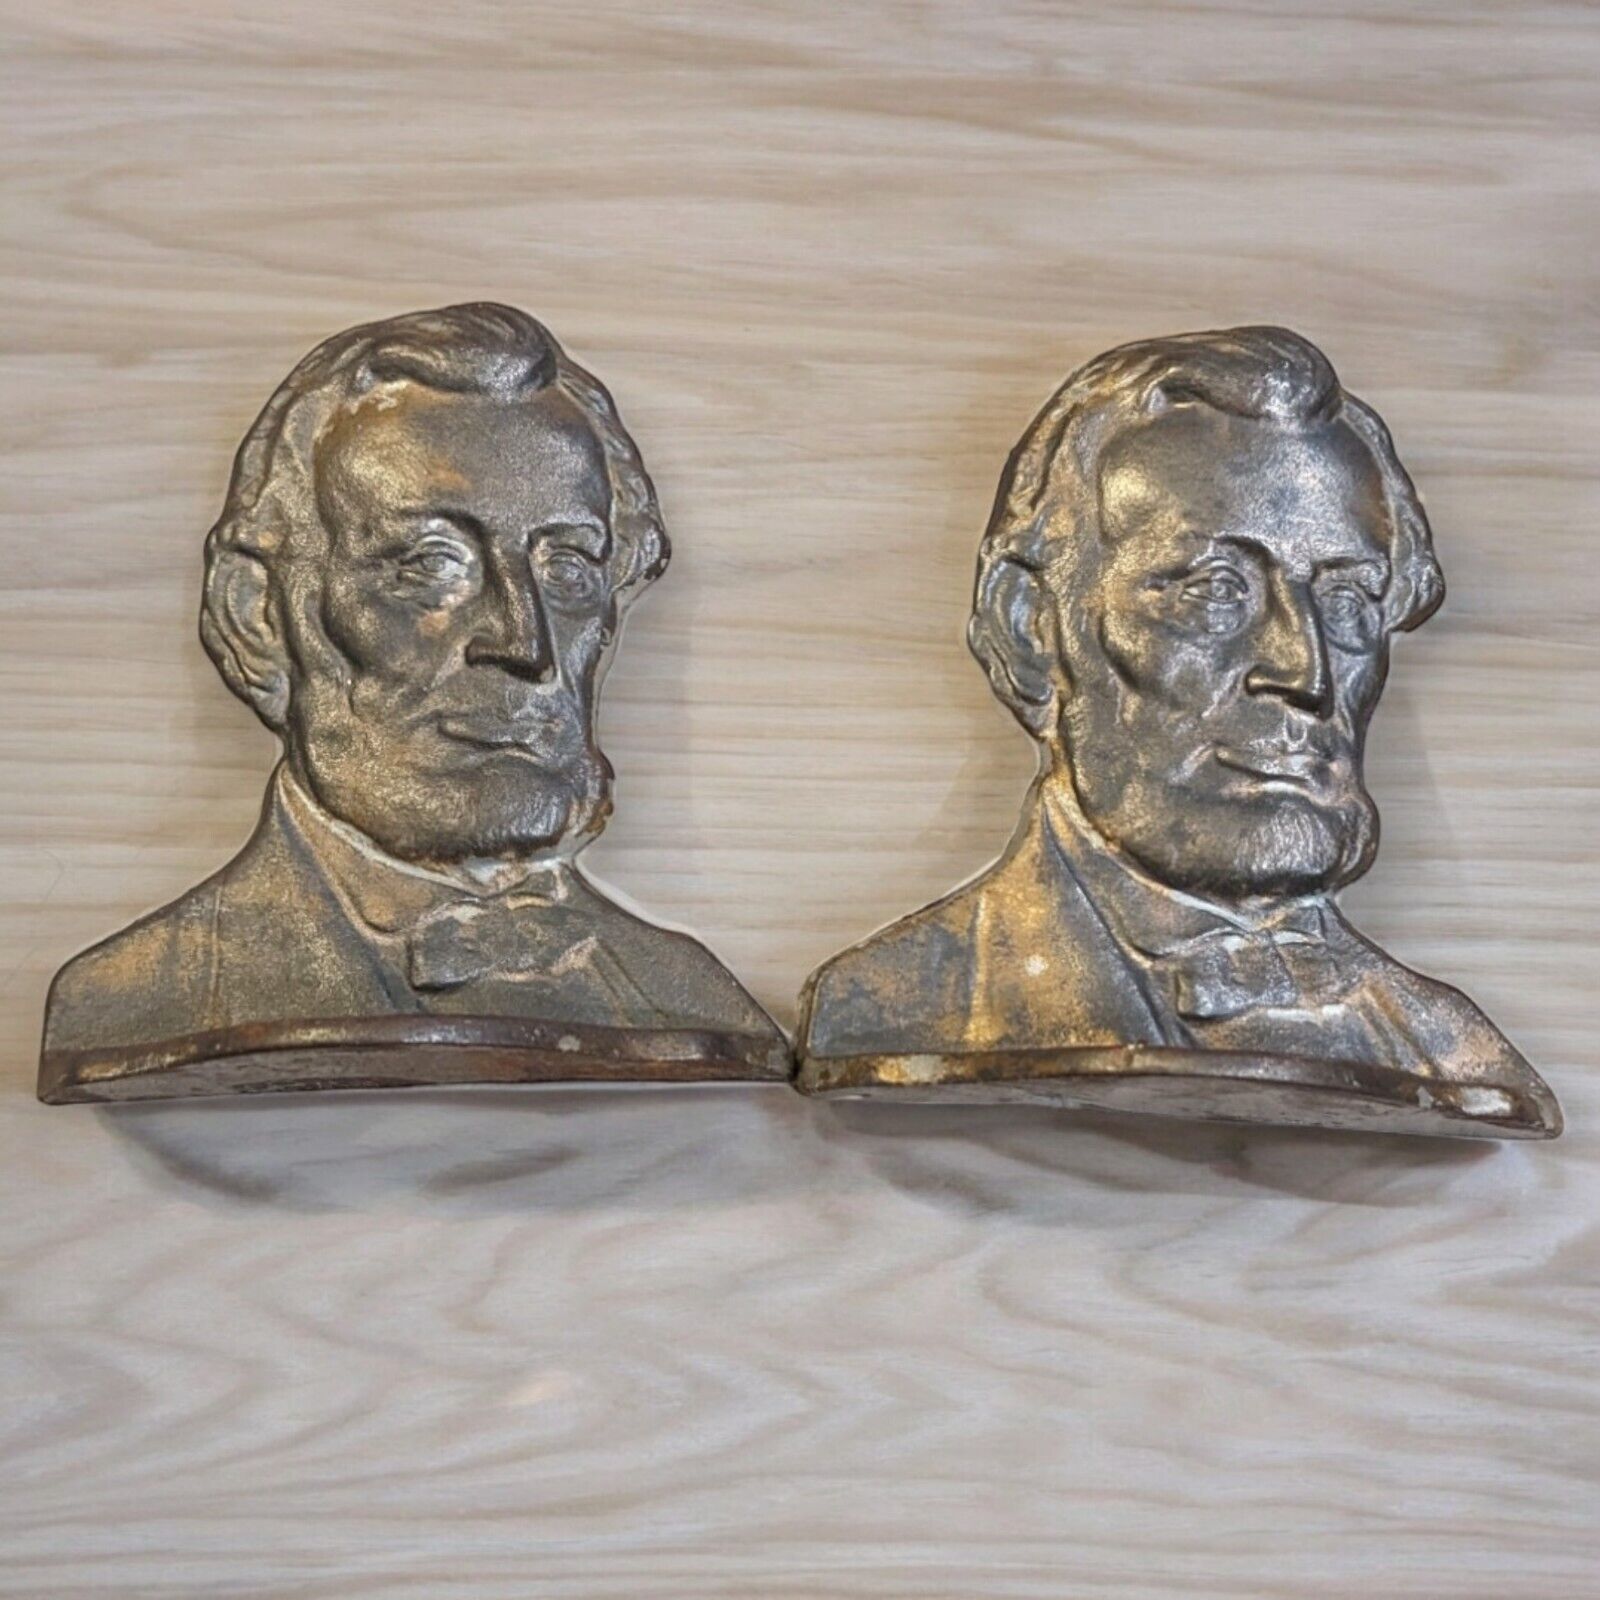 Antique 1928 Cast Iron / Bronzed Abraham Lincoln Bookends (Connecticut Foundry)